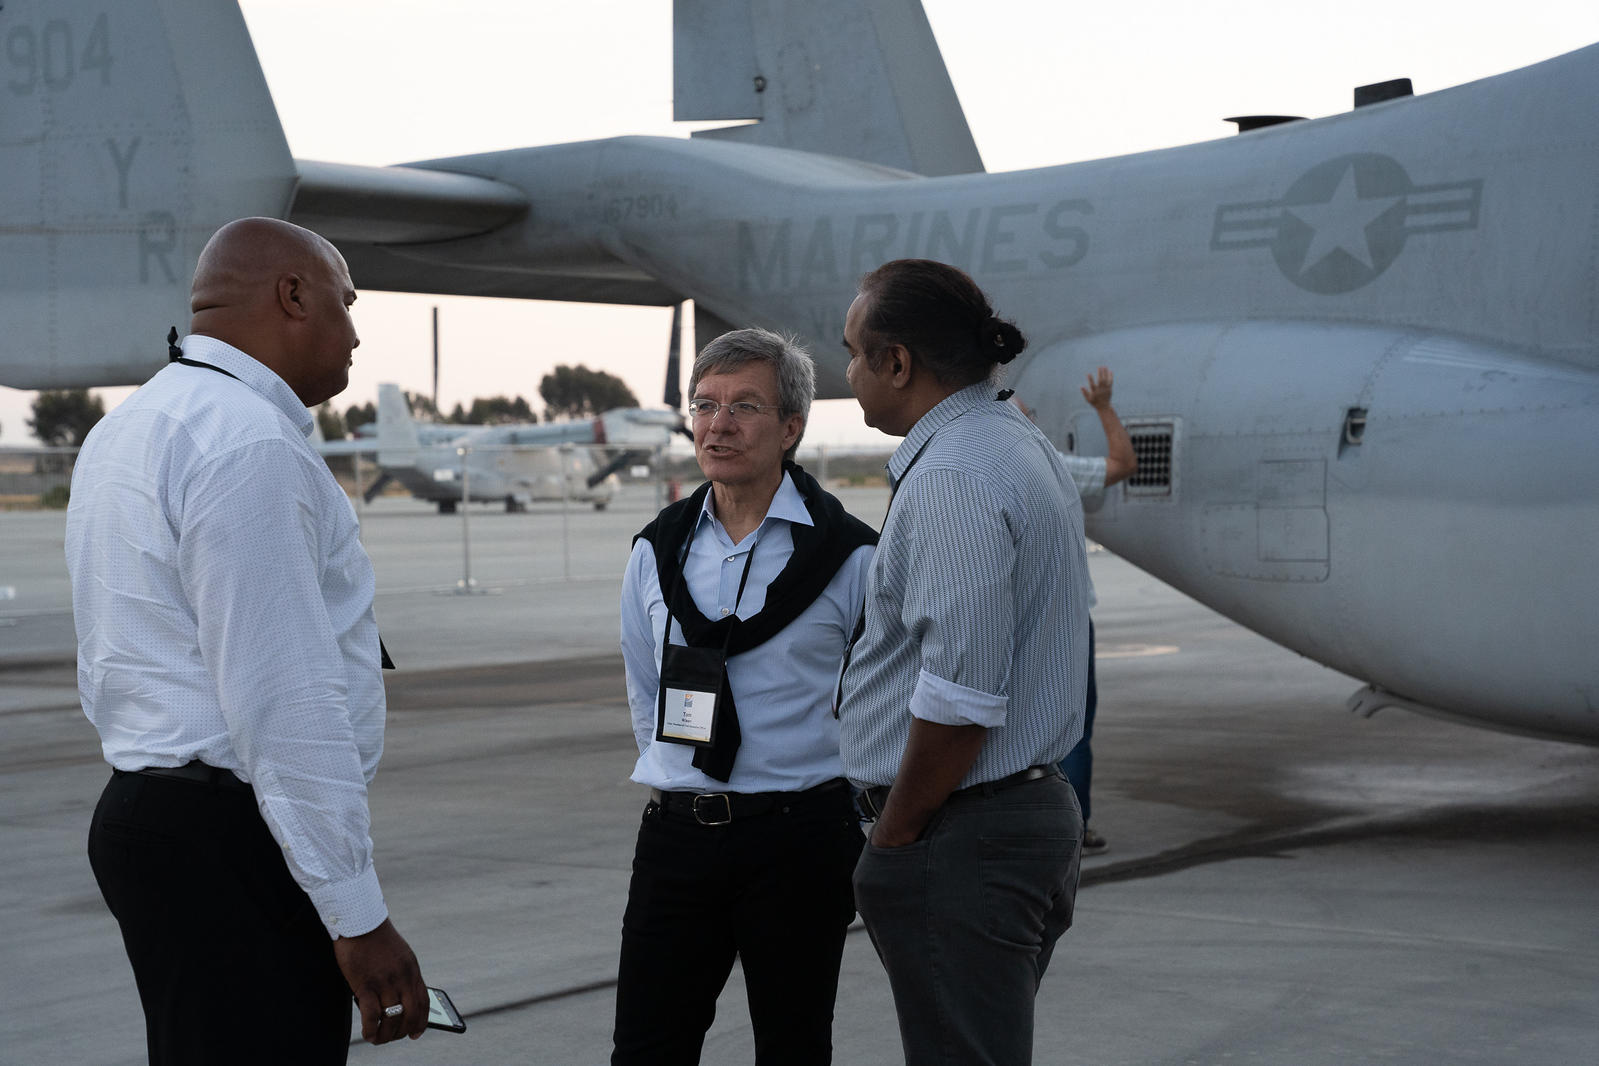 June 2022, Talking with Tom Wilson, Chairman, CEO and President of Allstate Insurance co at Miramar Airforce Base.